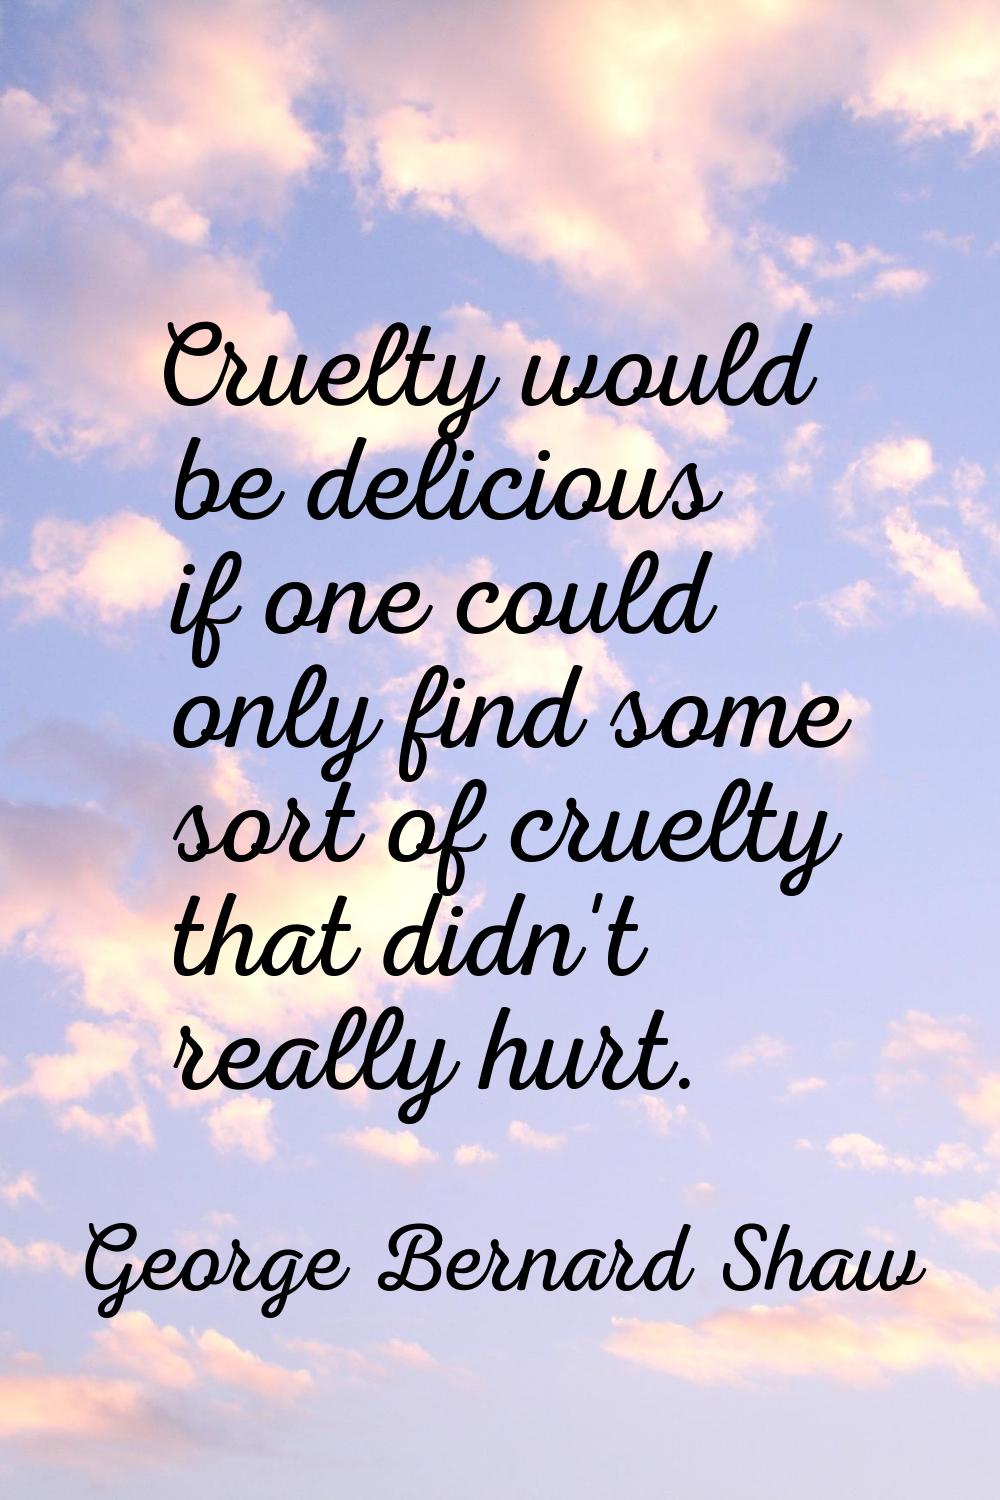 Cruelty would be delicious if one could only find some sort of cruelty that didn't really hurt.